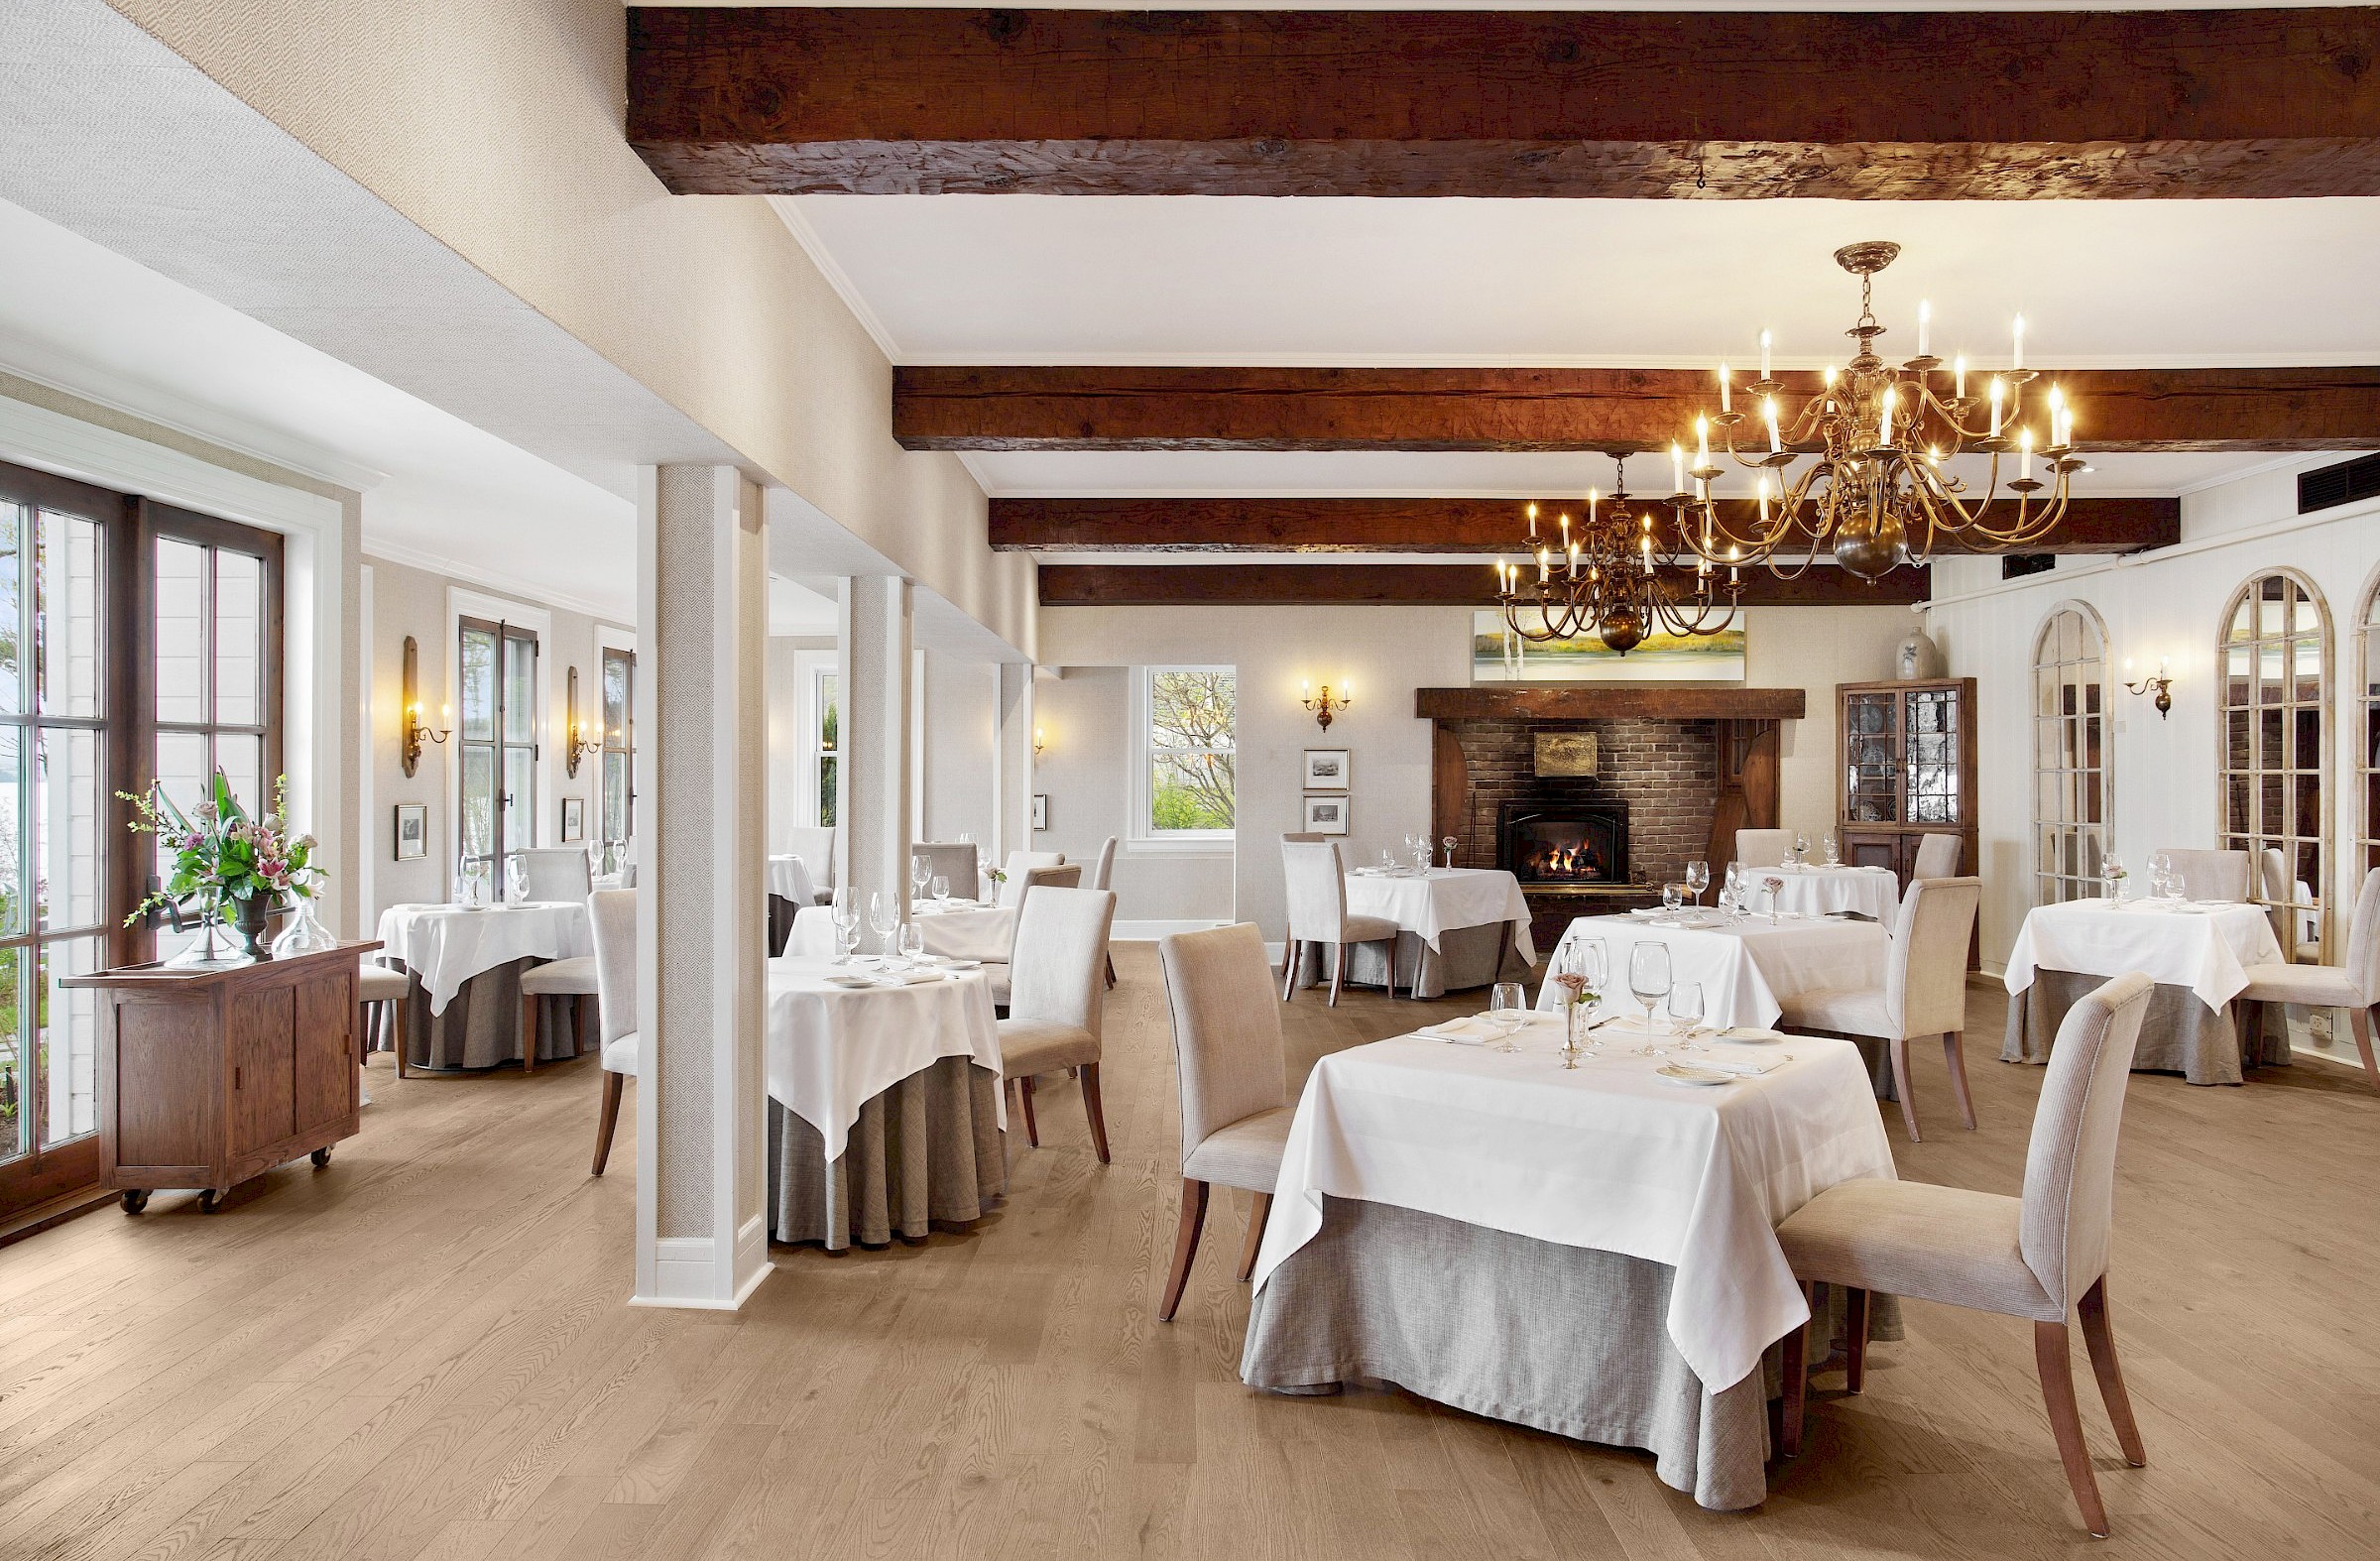 The main dining room in the restaurant